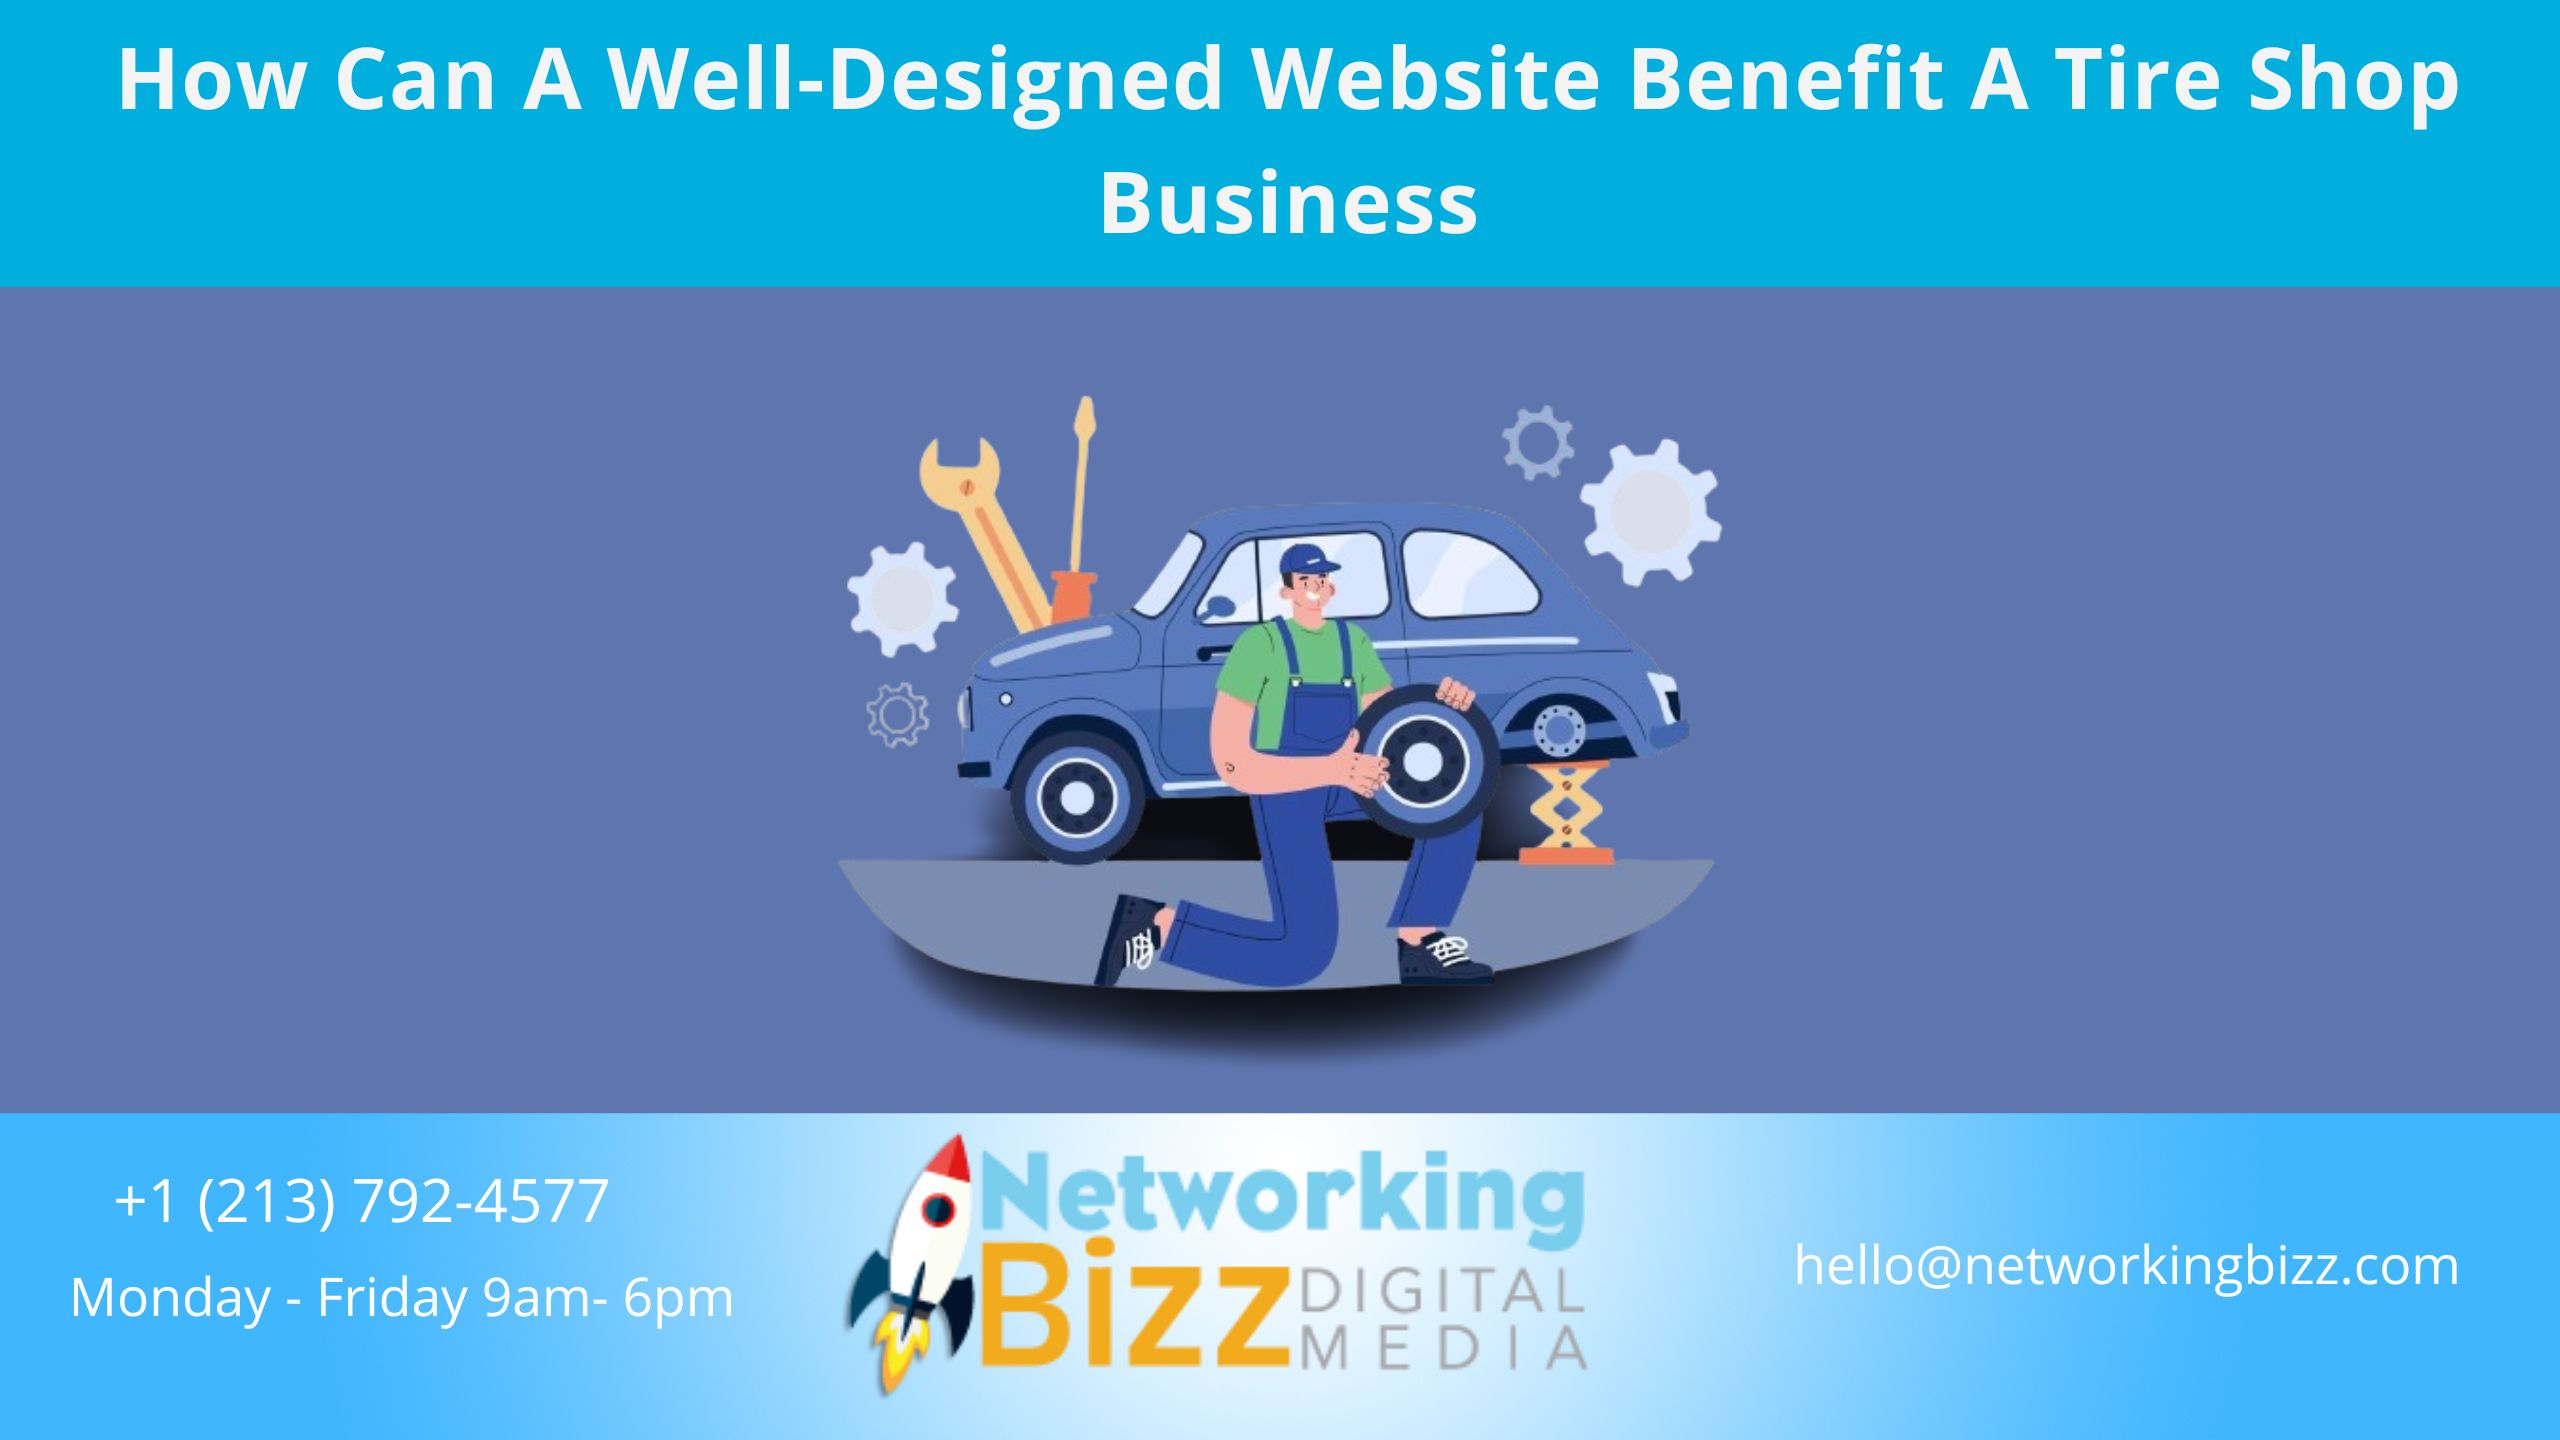 How Can A Well-Designed Website Benefit A Tire Shop Business